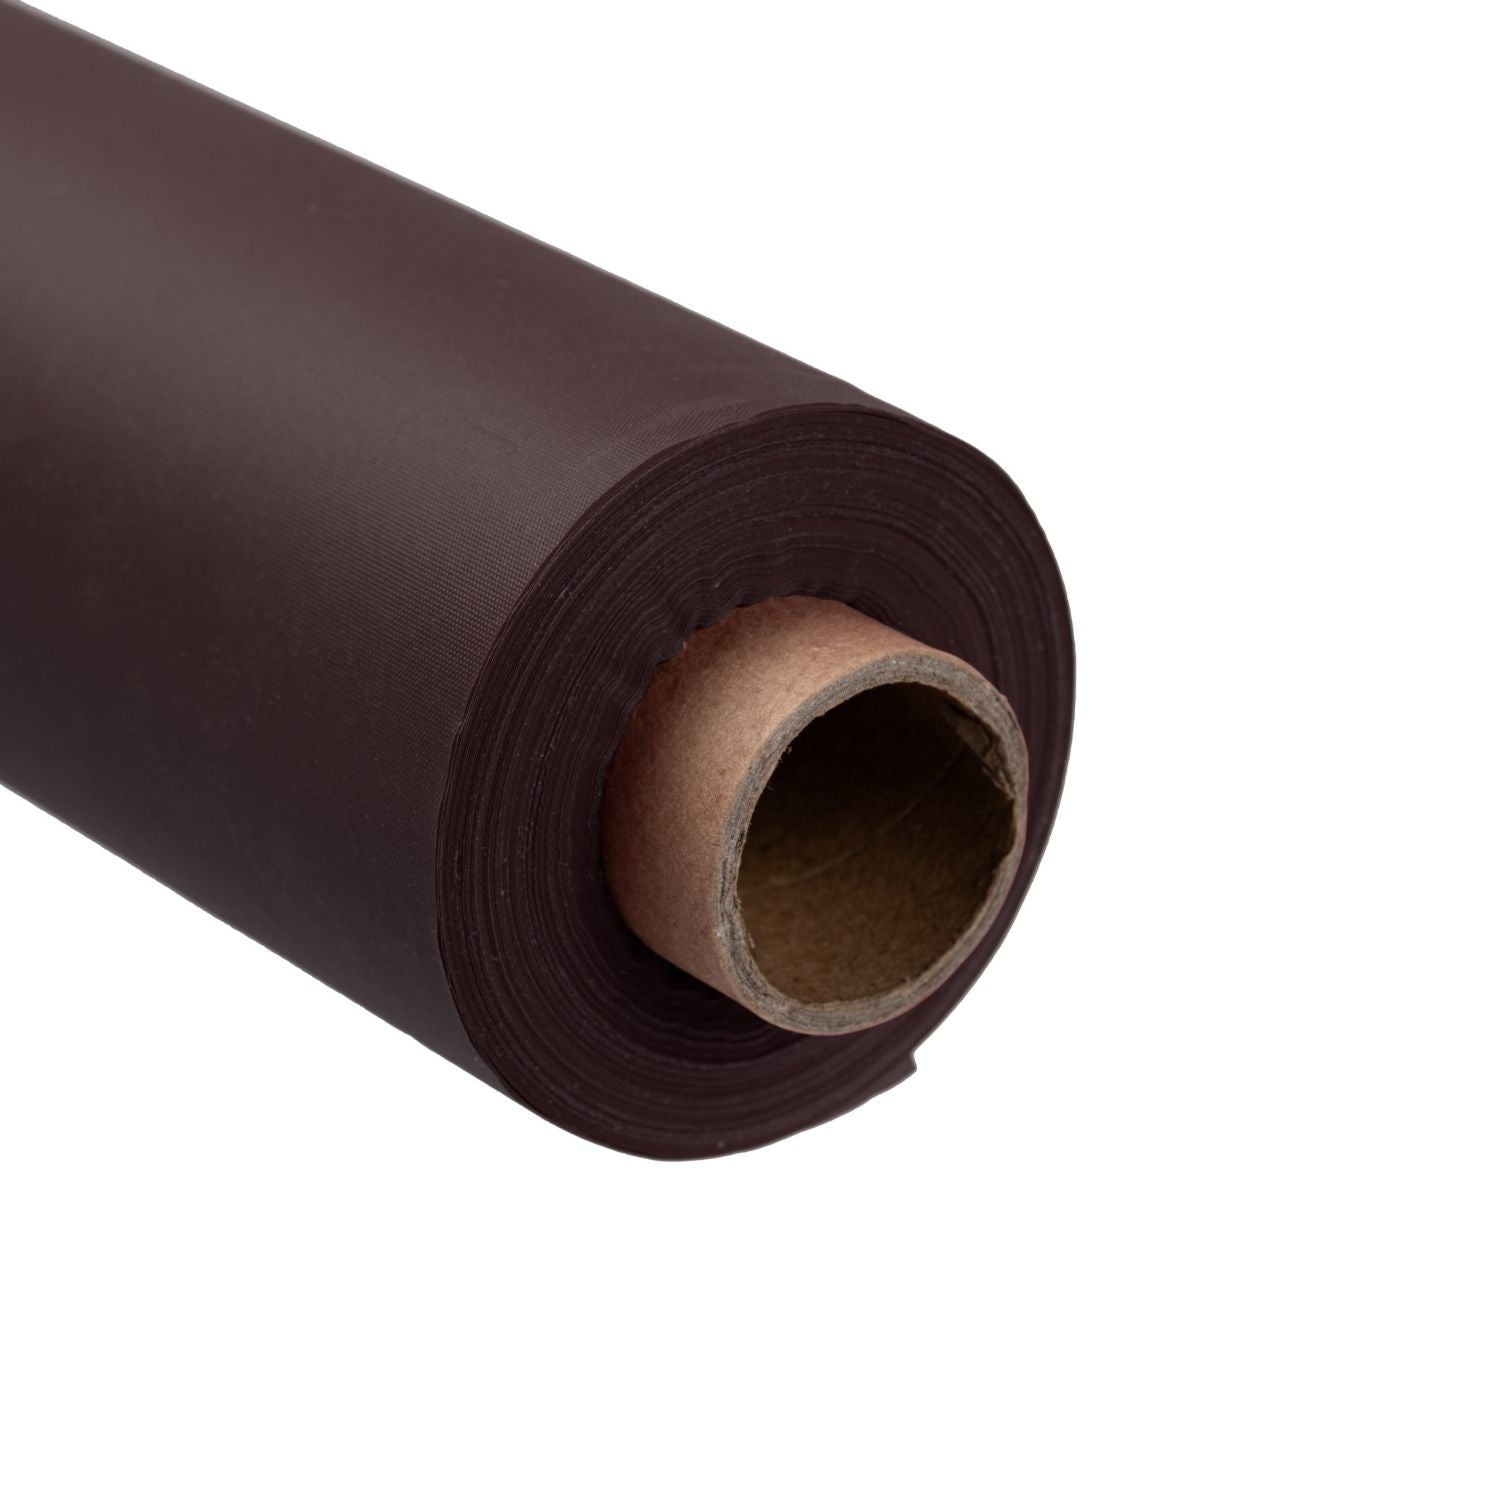 40 In. X 100 Ft. Premium Brown Plastic Table Roll | 6 Pack